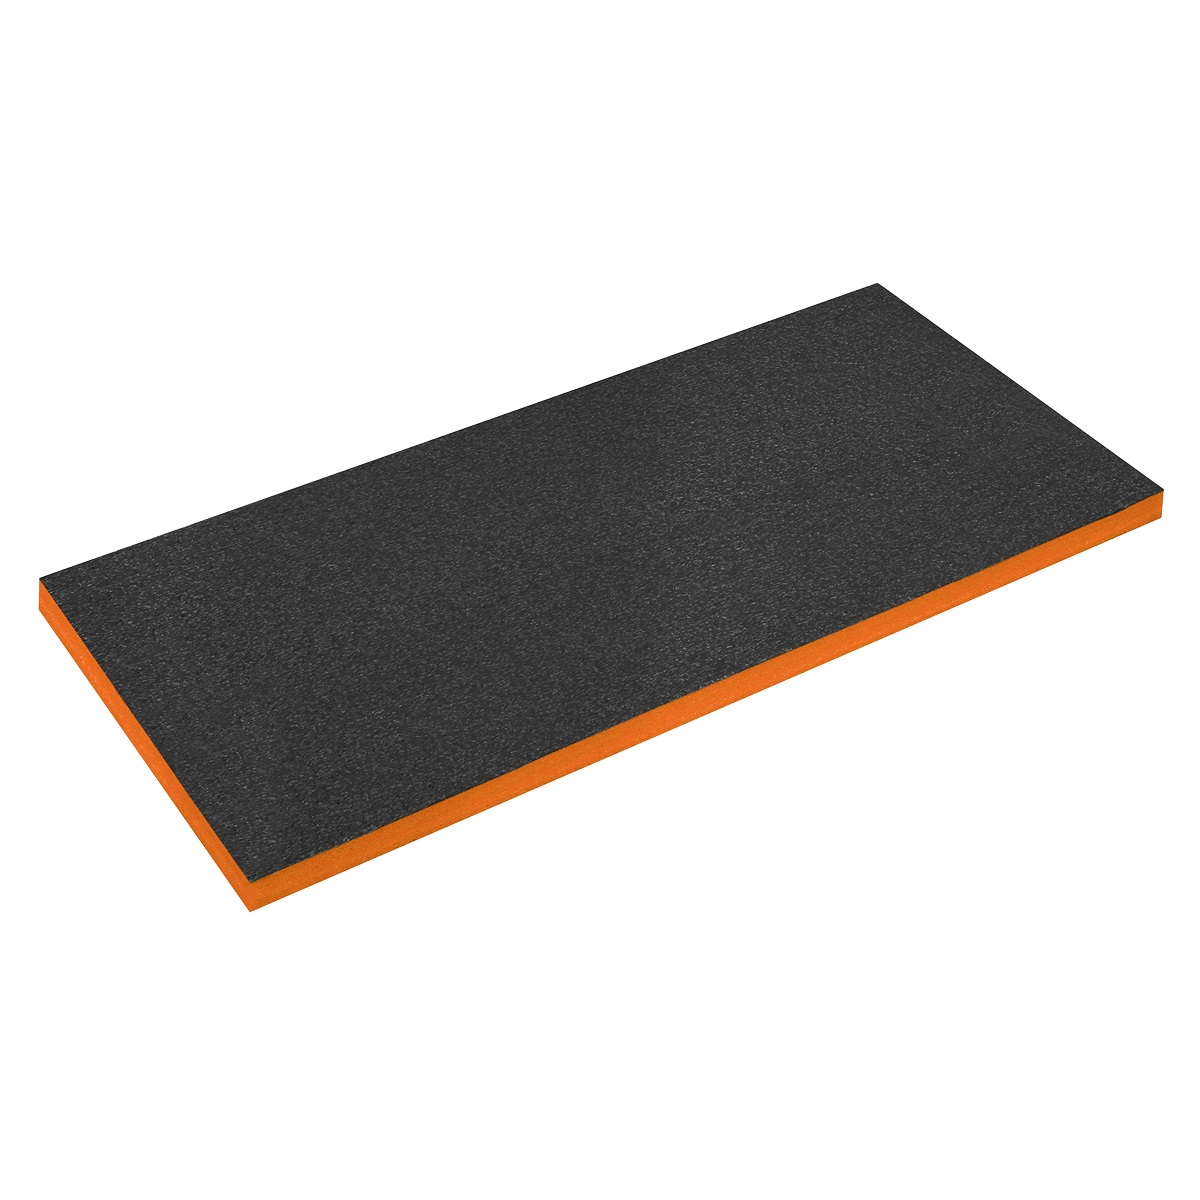 Sealey Easy Peel Shadow Foam® Orange/Black 1200 x 550 x 50mm SF50OR, Create your own tool tray inserts with this easy peel foam.